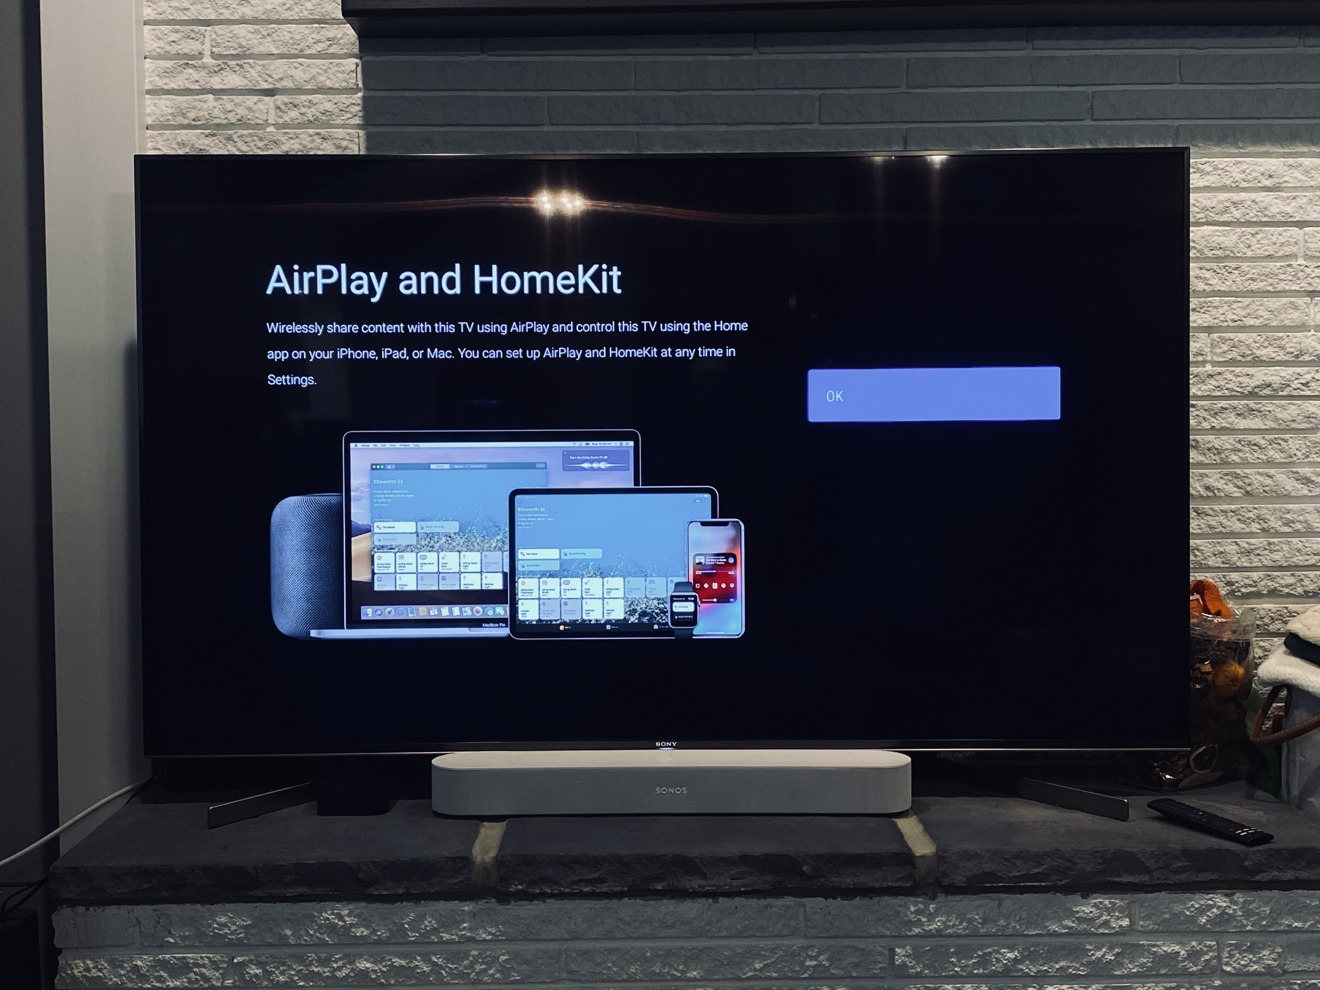 Hot And Airplay 2 On Sony Smart Tvs, Can I Screen Mirror Iphone To Sony Smart Tv